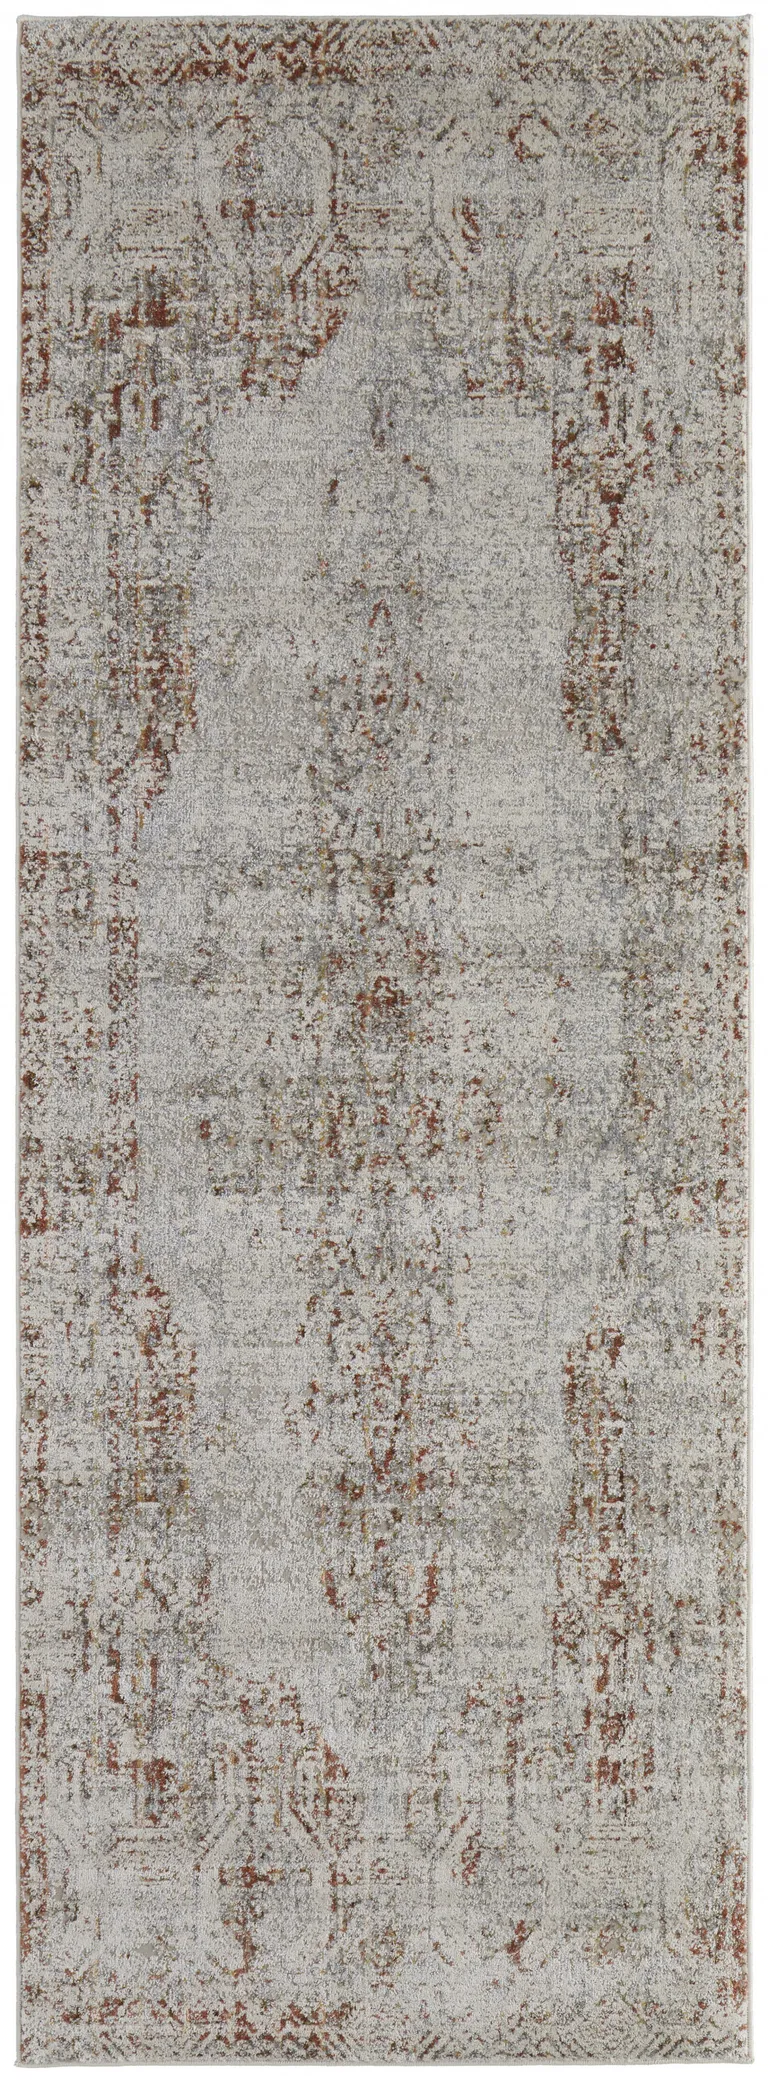 12' Tan Ivory And Orange Floral Power Loom Distressed Runner Rug With Fringe Photo 1